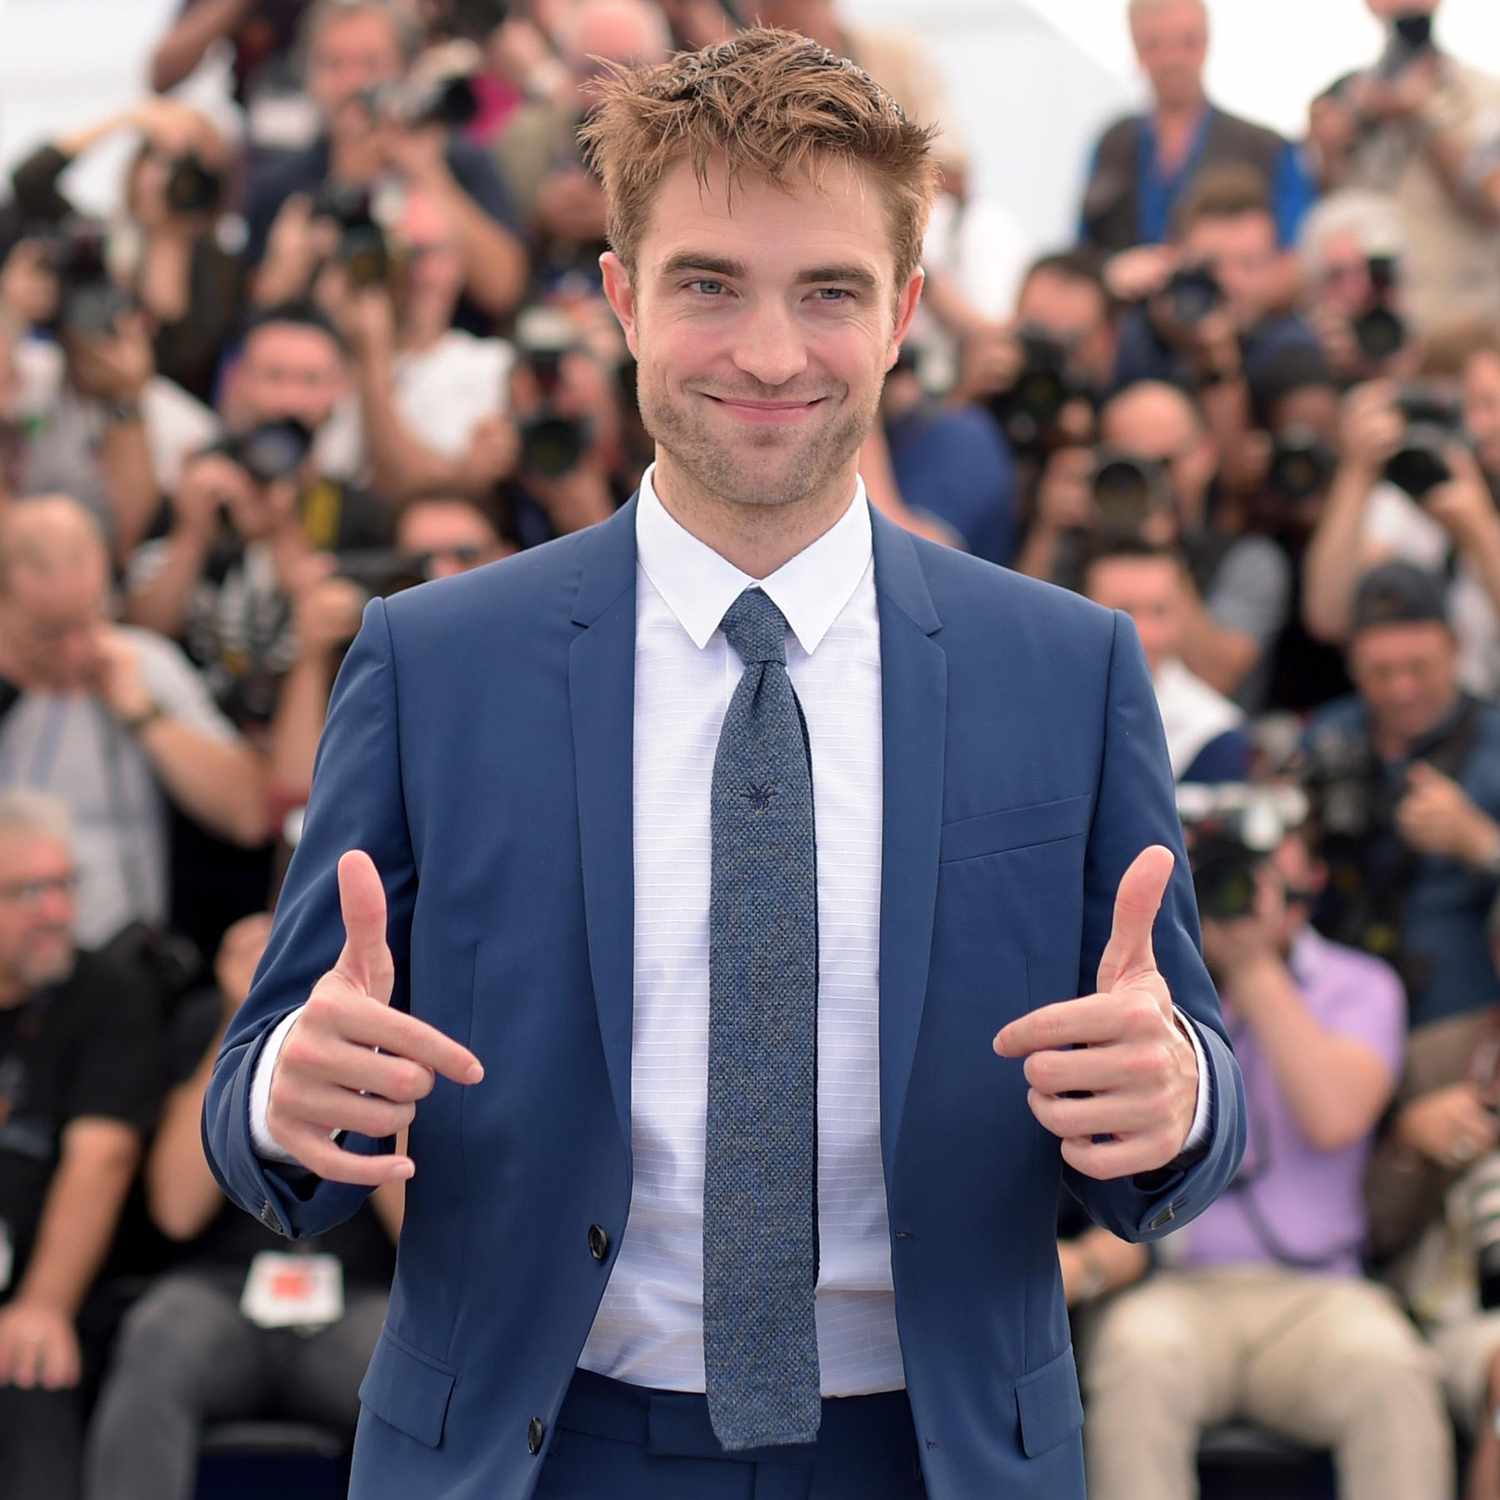 "Good Time" Photocall - The 70th Annual Cannes Film Festival